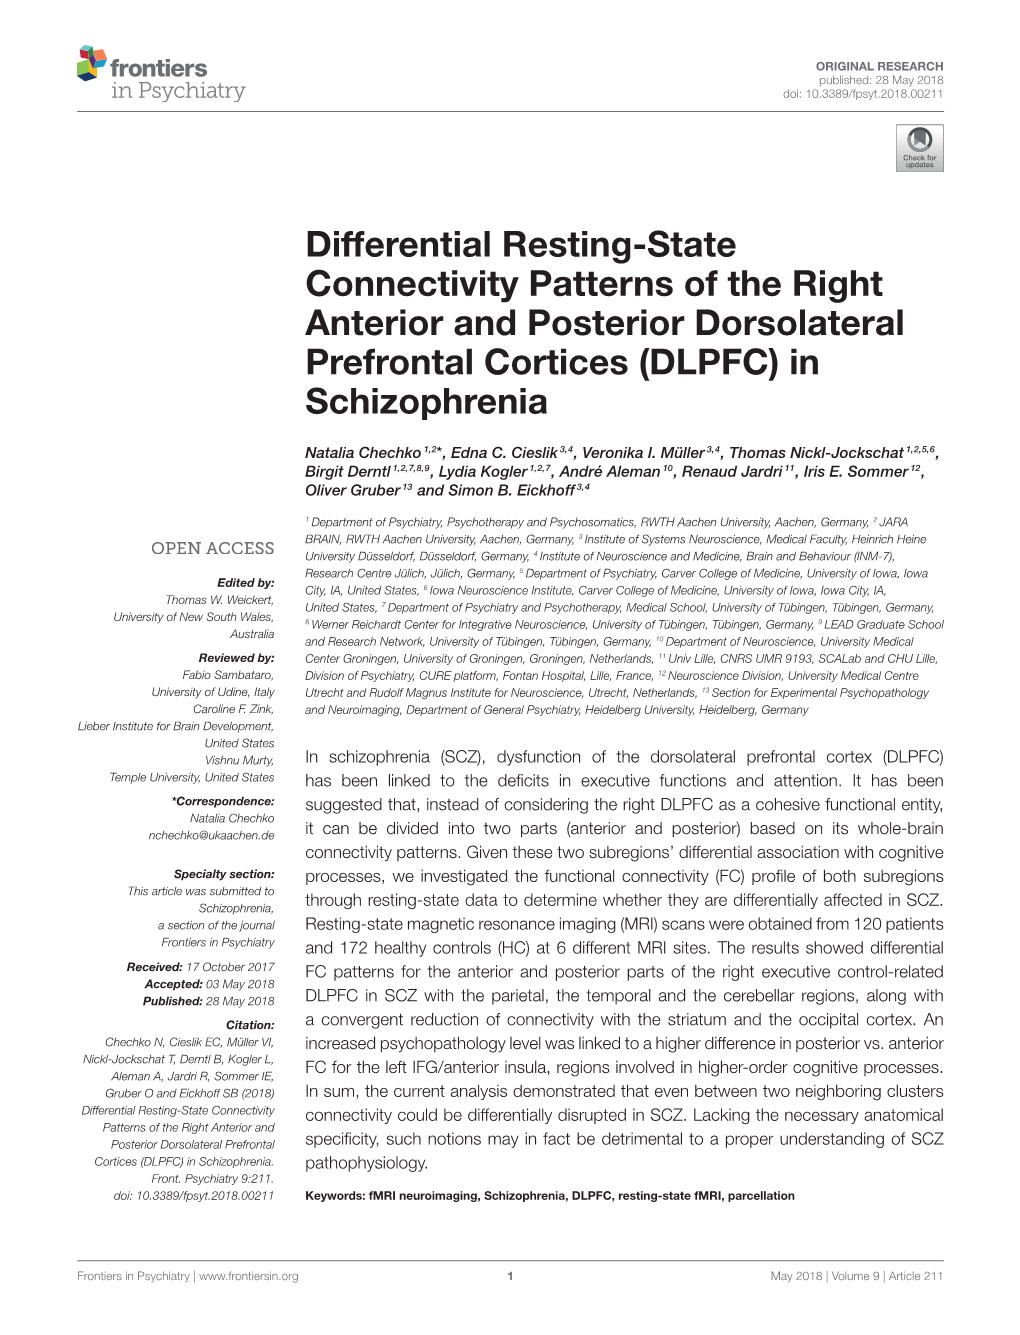 Differential Resting-State Connectivity Patterns of the Right Anterior and Posterior Dorsolateral Prefrontal Cortices (DLPFC) in Schizophrenia